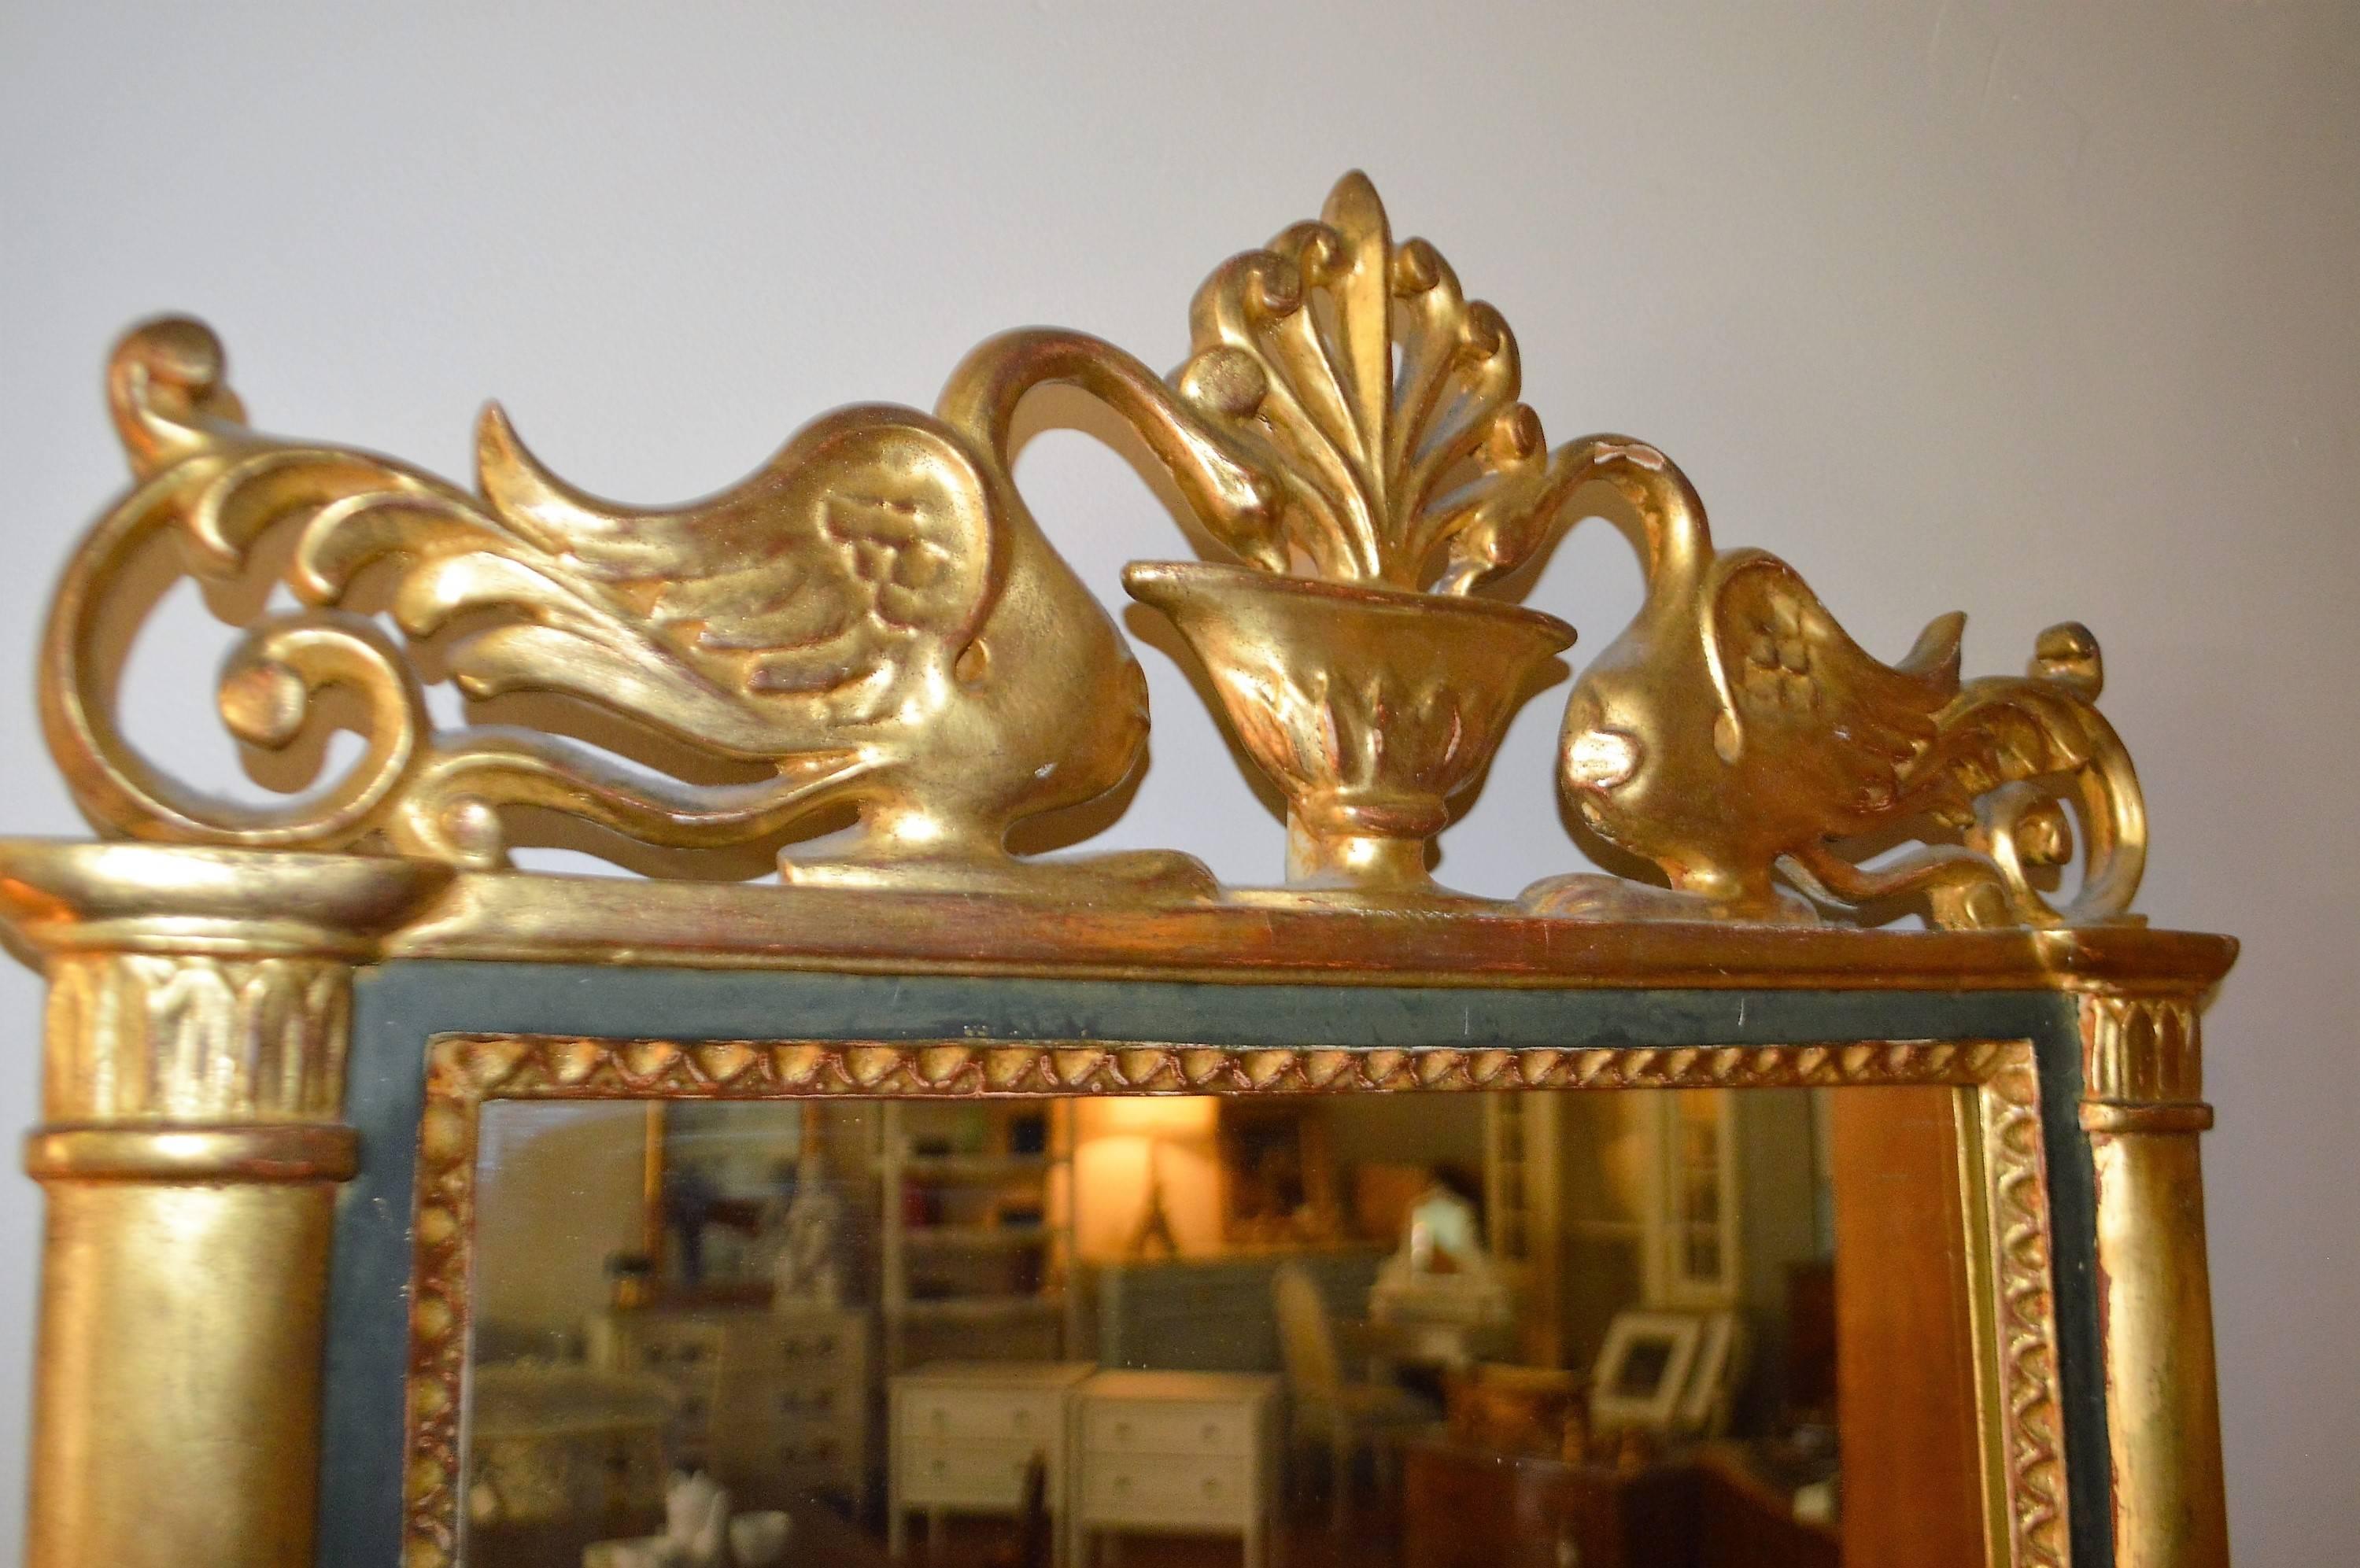 Unusual and highly decorative wooden gilded mirror flanked by two swans 
at the top and fleur de lis decor on the side panels. Dark green paint between moldings.
 